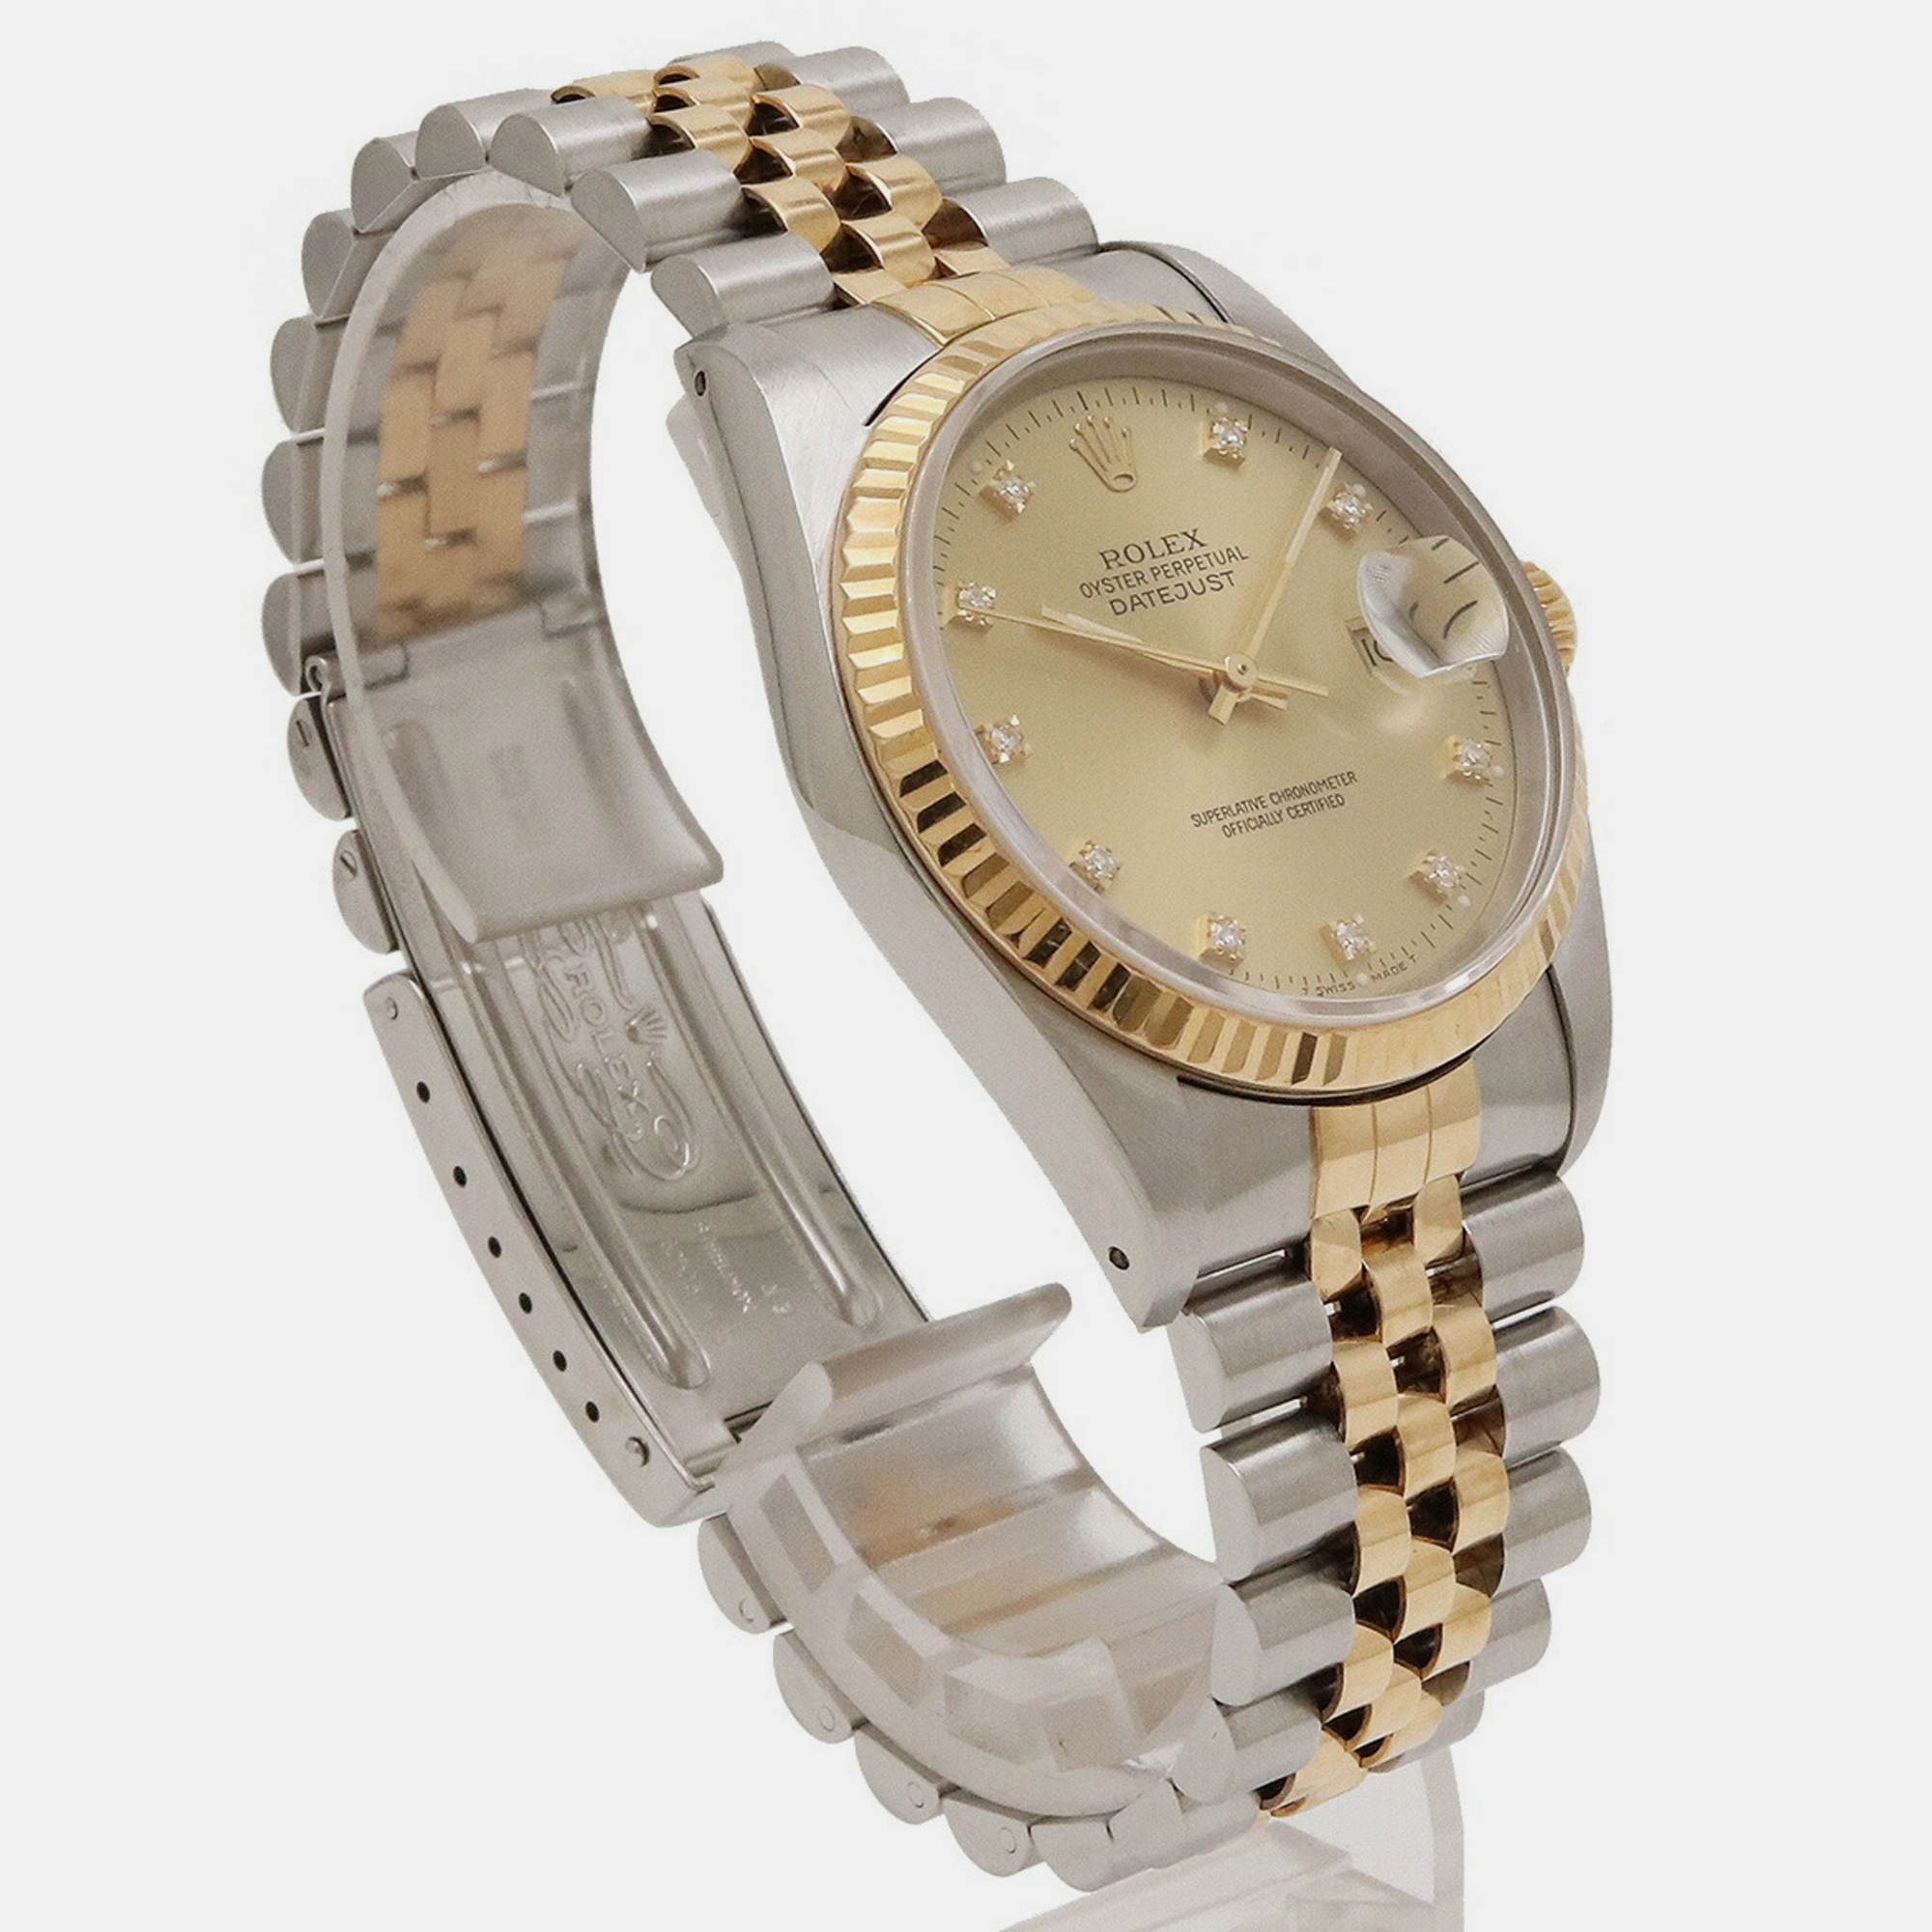 Rolex Champagne Diamond 18k Yellow Gold And Stainless Steel Datejust 16233 Automatic Men's Wristwatch 36 Mm